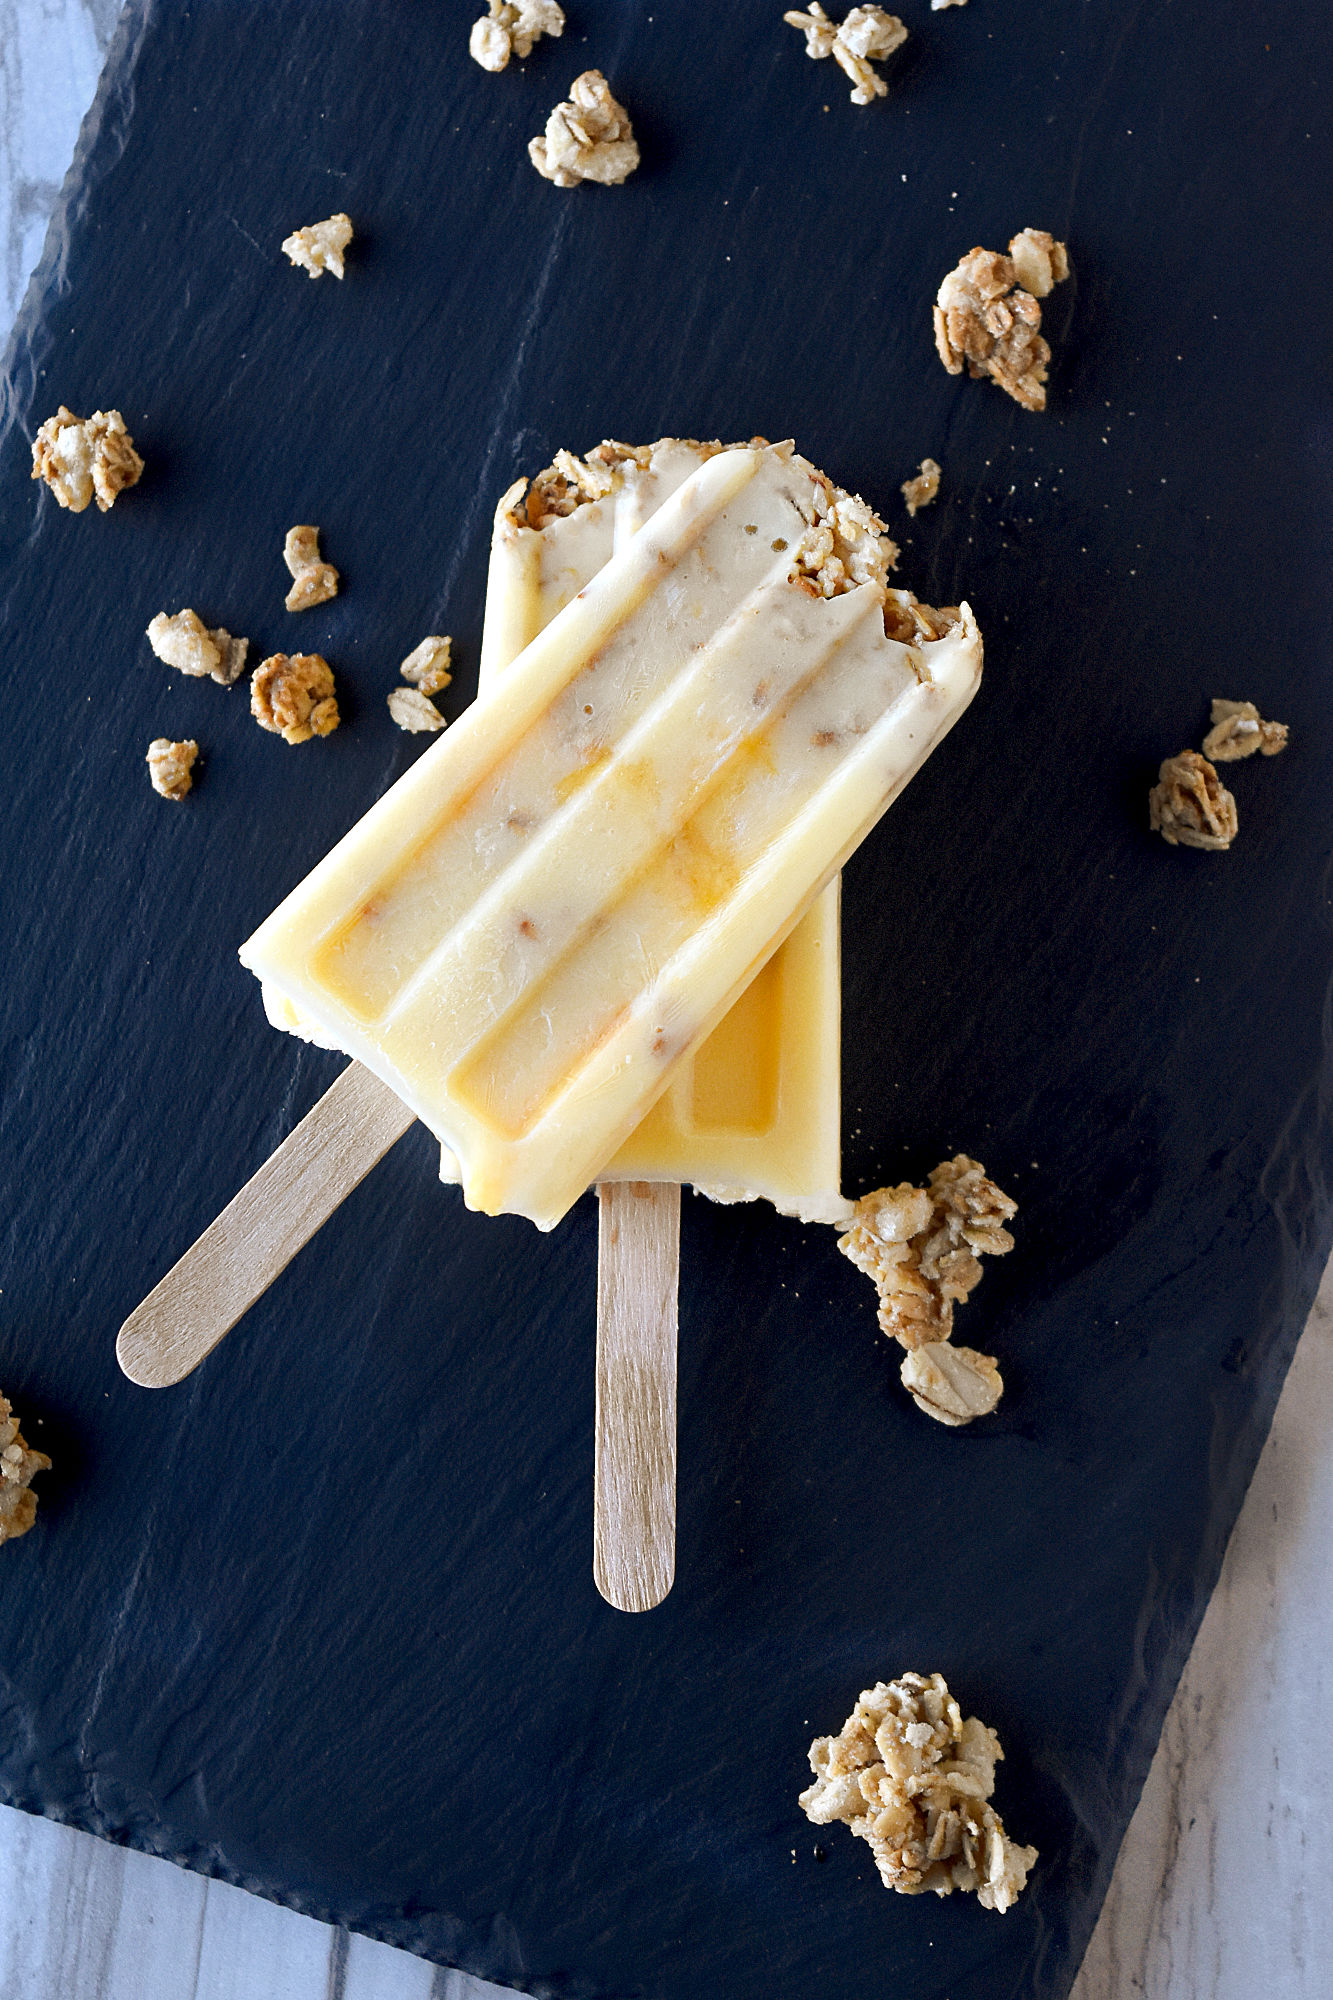 Peach Crisp Popsicles have delicious summer flavor in an easy to whip up frozen dessert. The granola adds the texture of a crisp without heating up the kitchen. #FarmersMarketWeek